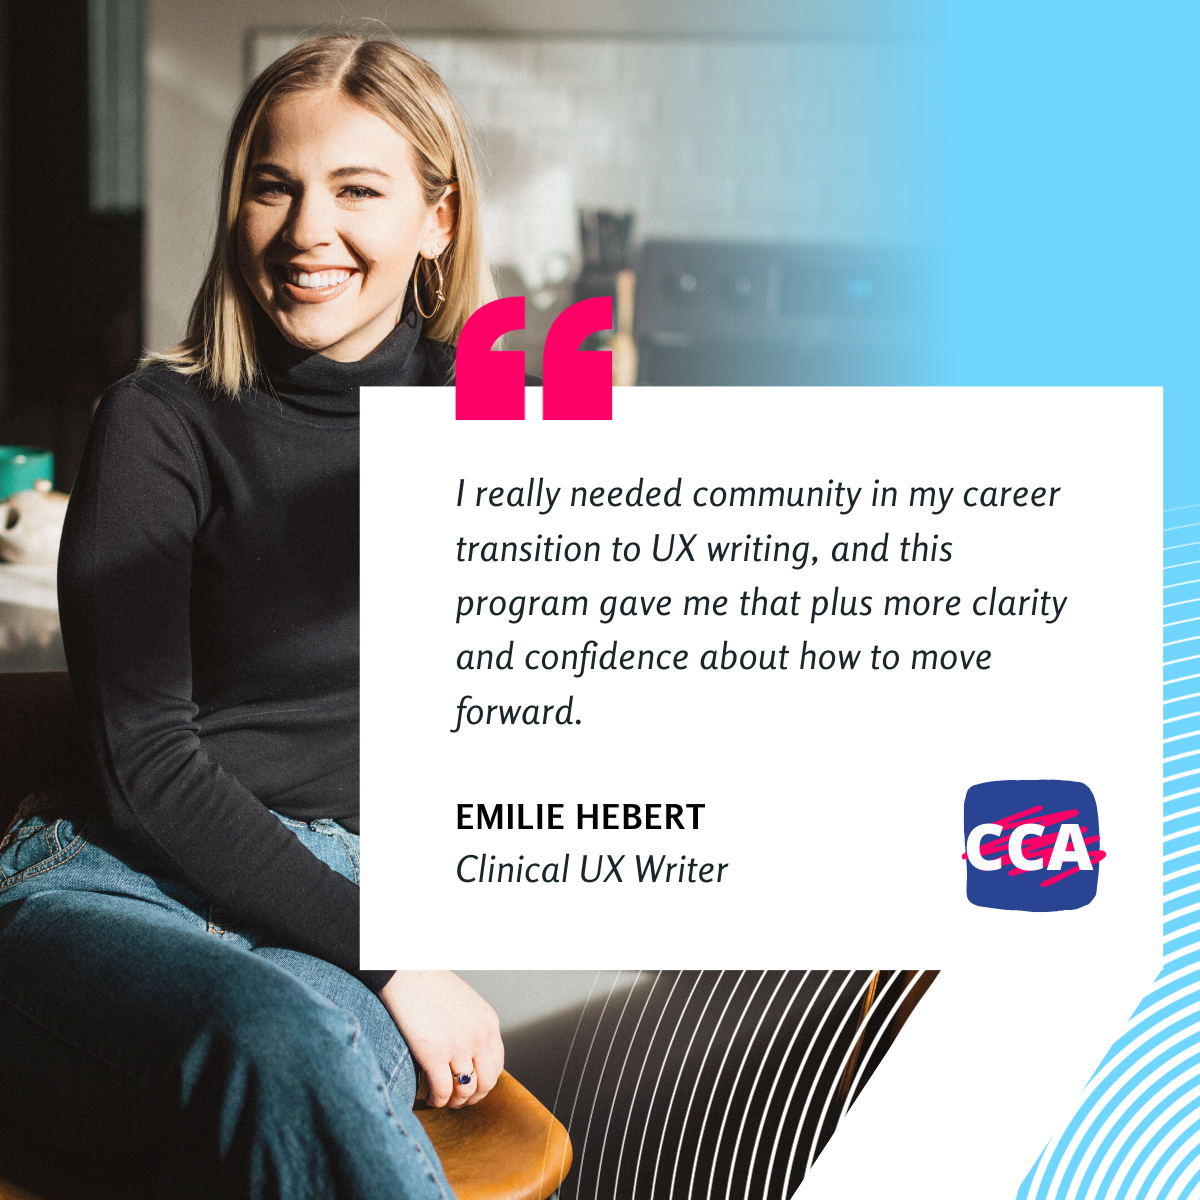 Testimonial attributed to Emilie Hebert, Clinical UX Writer, that reads: I really needed community in my transition to UX writing, and this program gave me that plus more clarity and confidence about how to move forward.